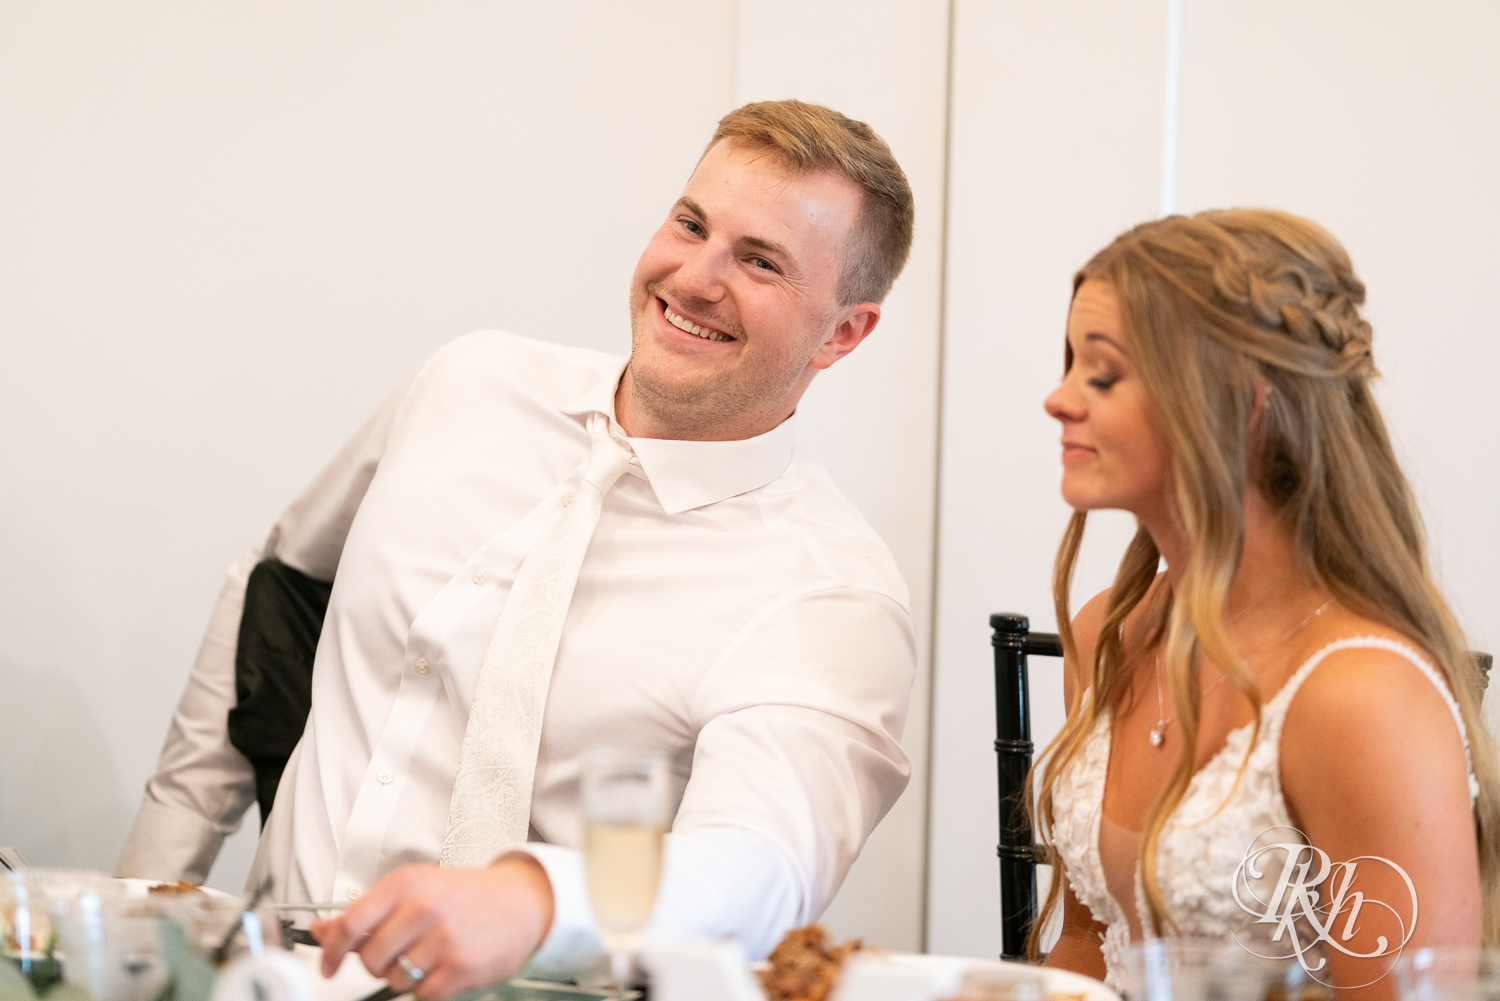 Groom laughing during wedding reception at Ahavah Cottage in Elysian, Minnesota.